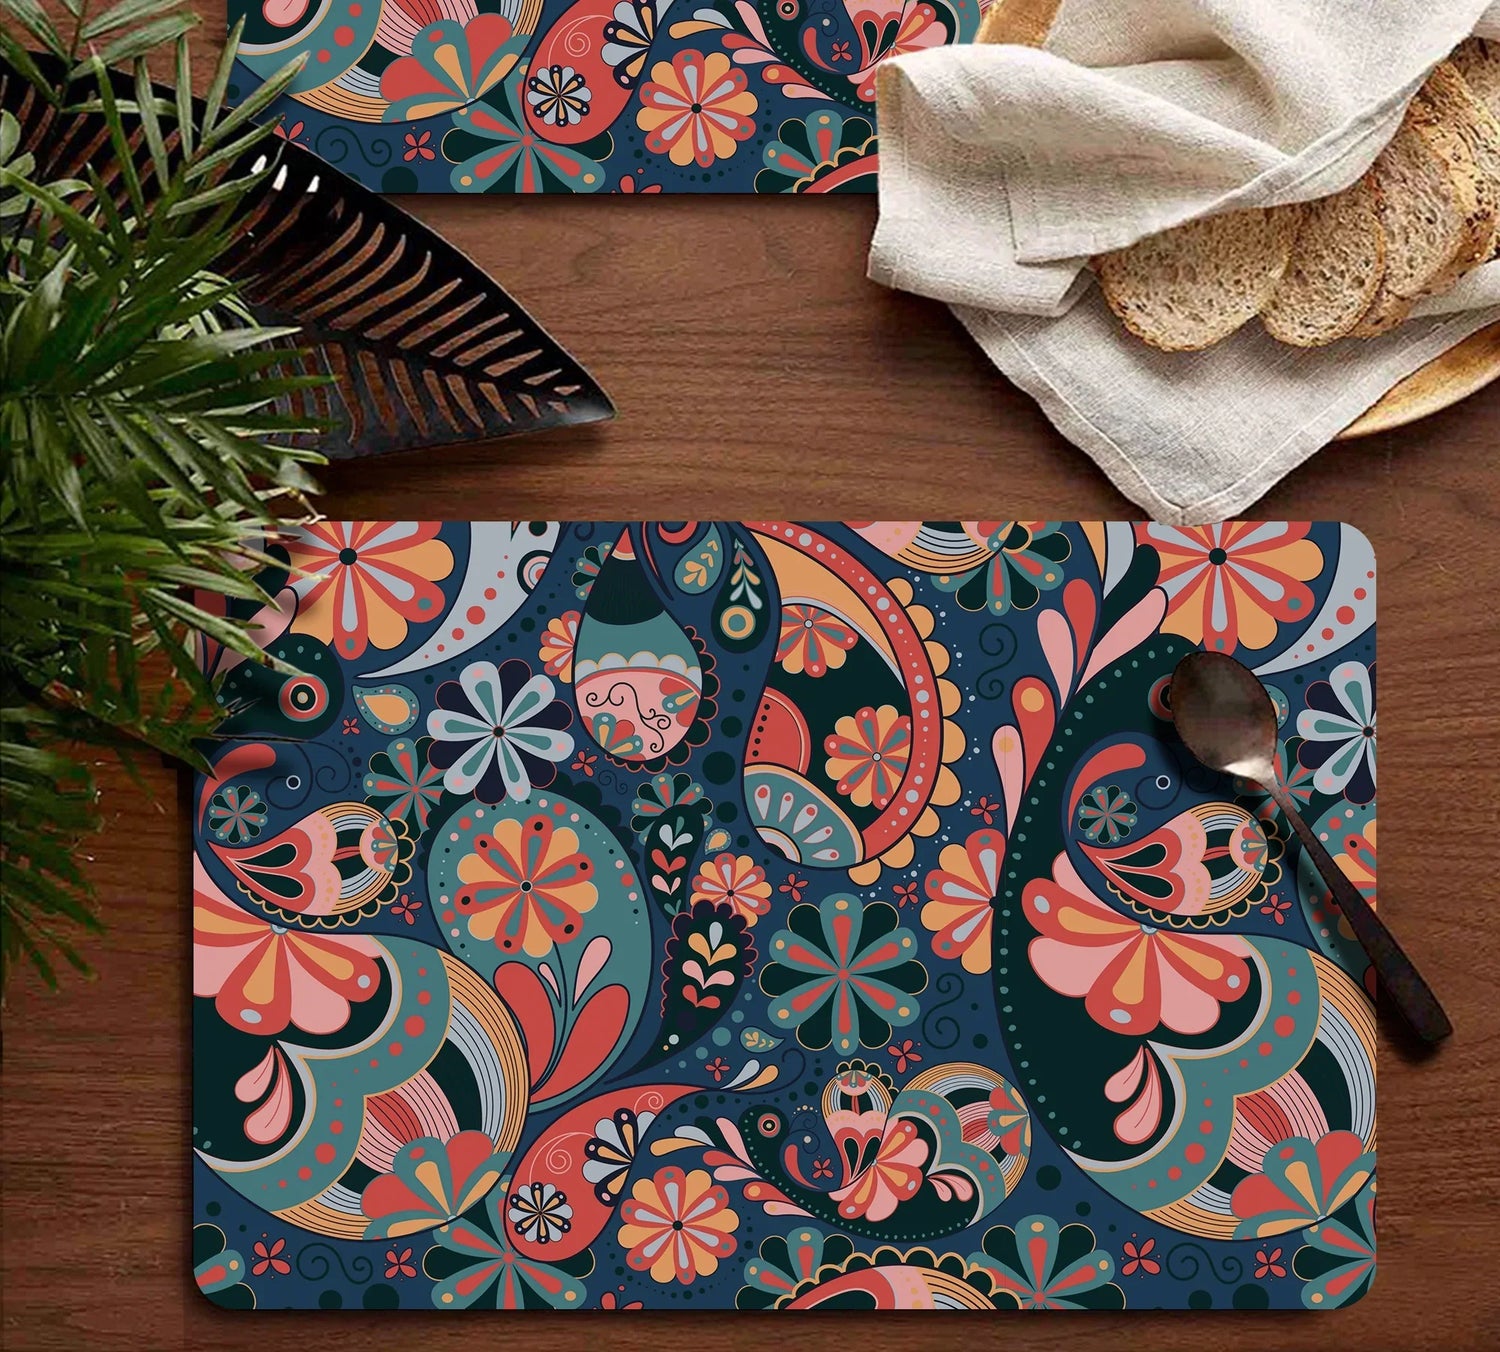 Colorful and patterned placemats for dining